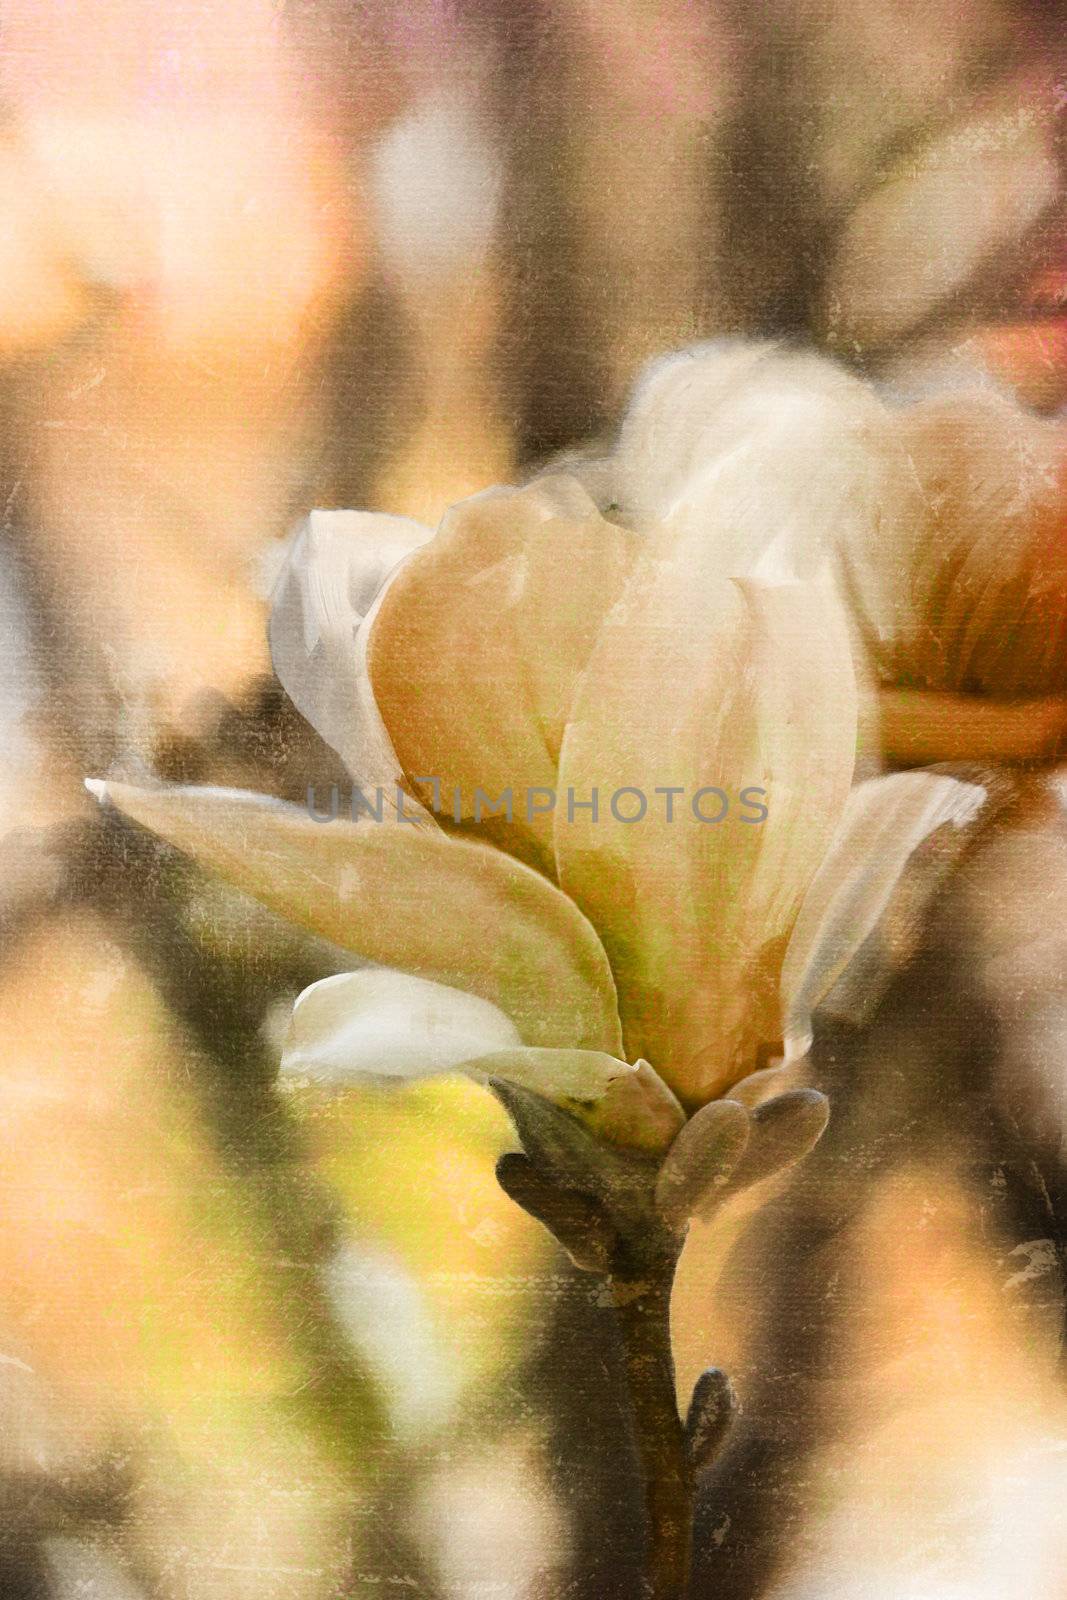 Japanese Magnolia tree blossoms with extreme shallow DOF.
